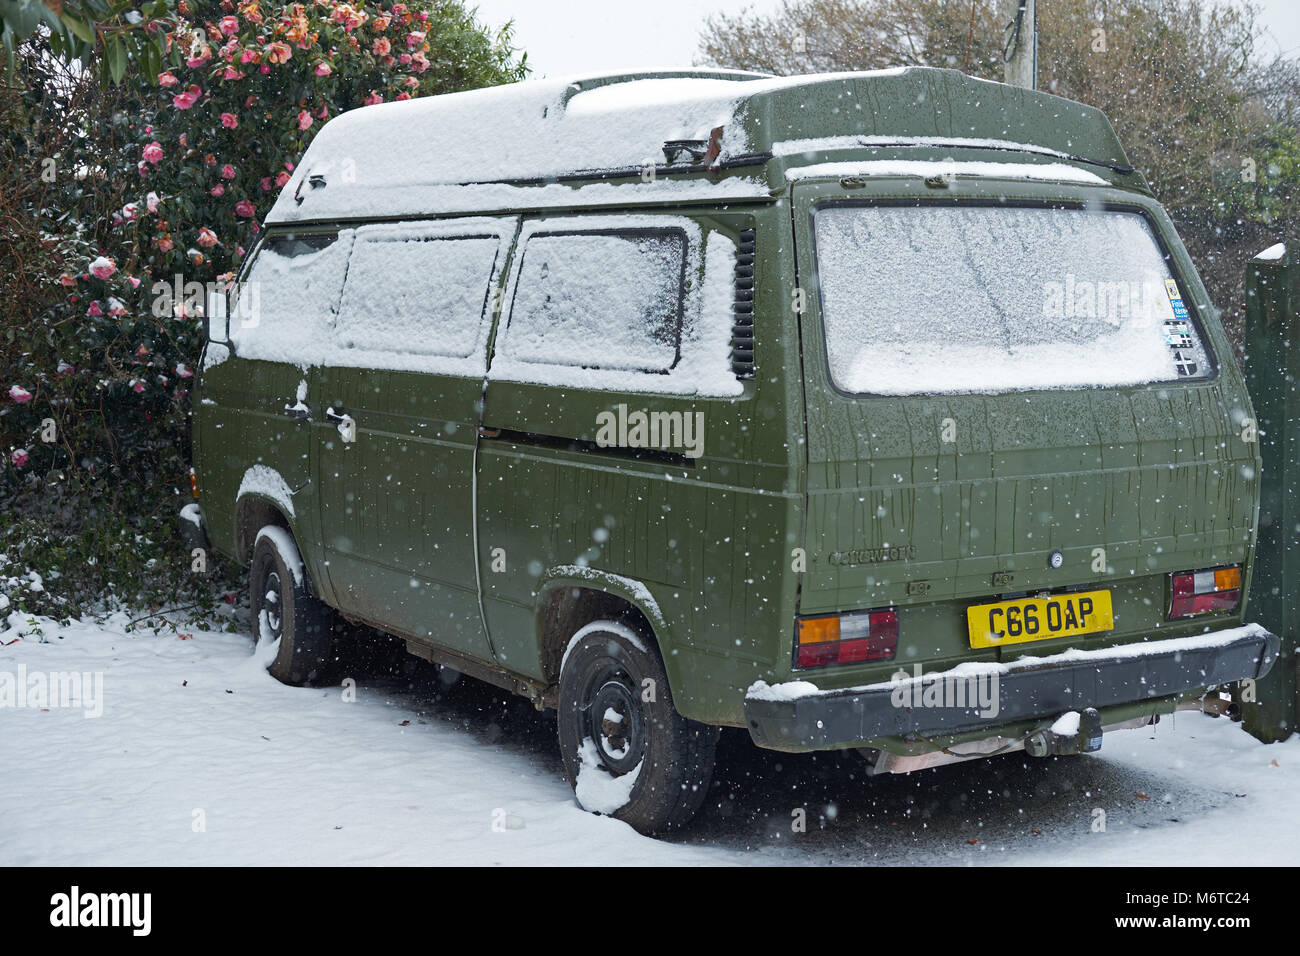 A campervan in the snow. Stock Photo